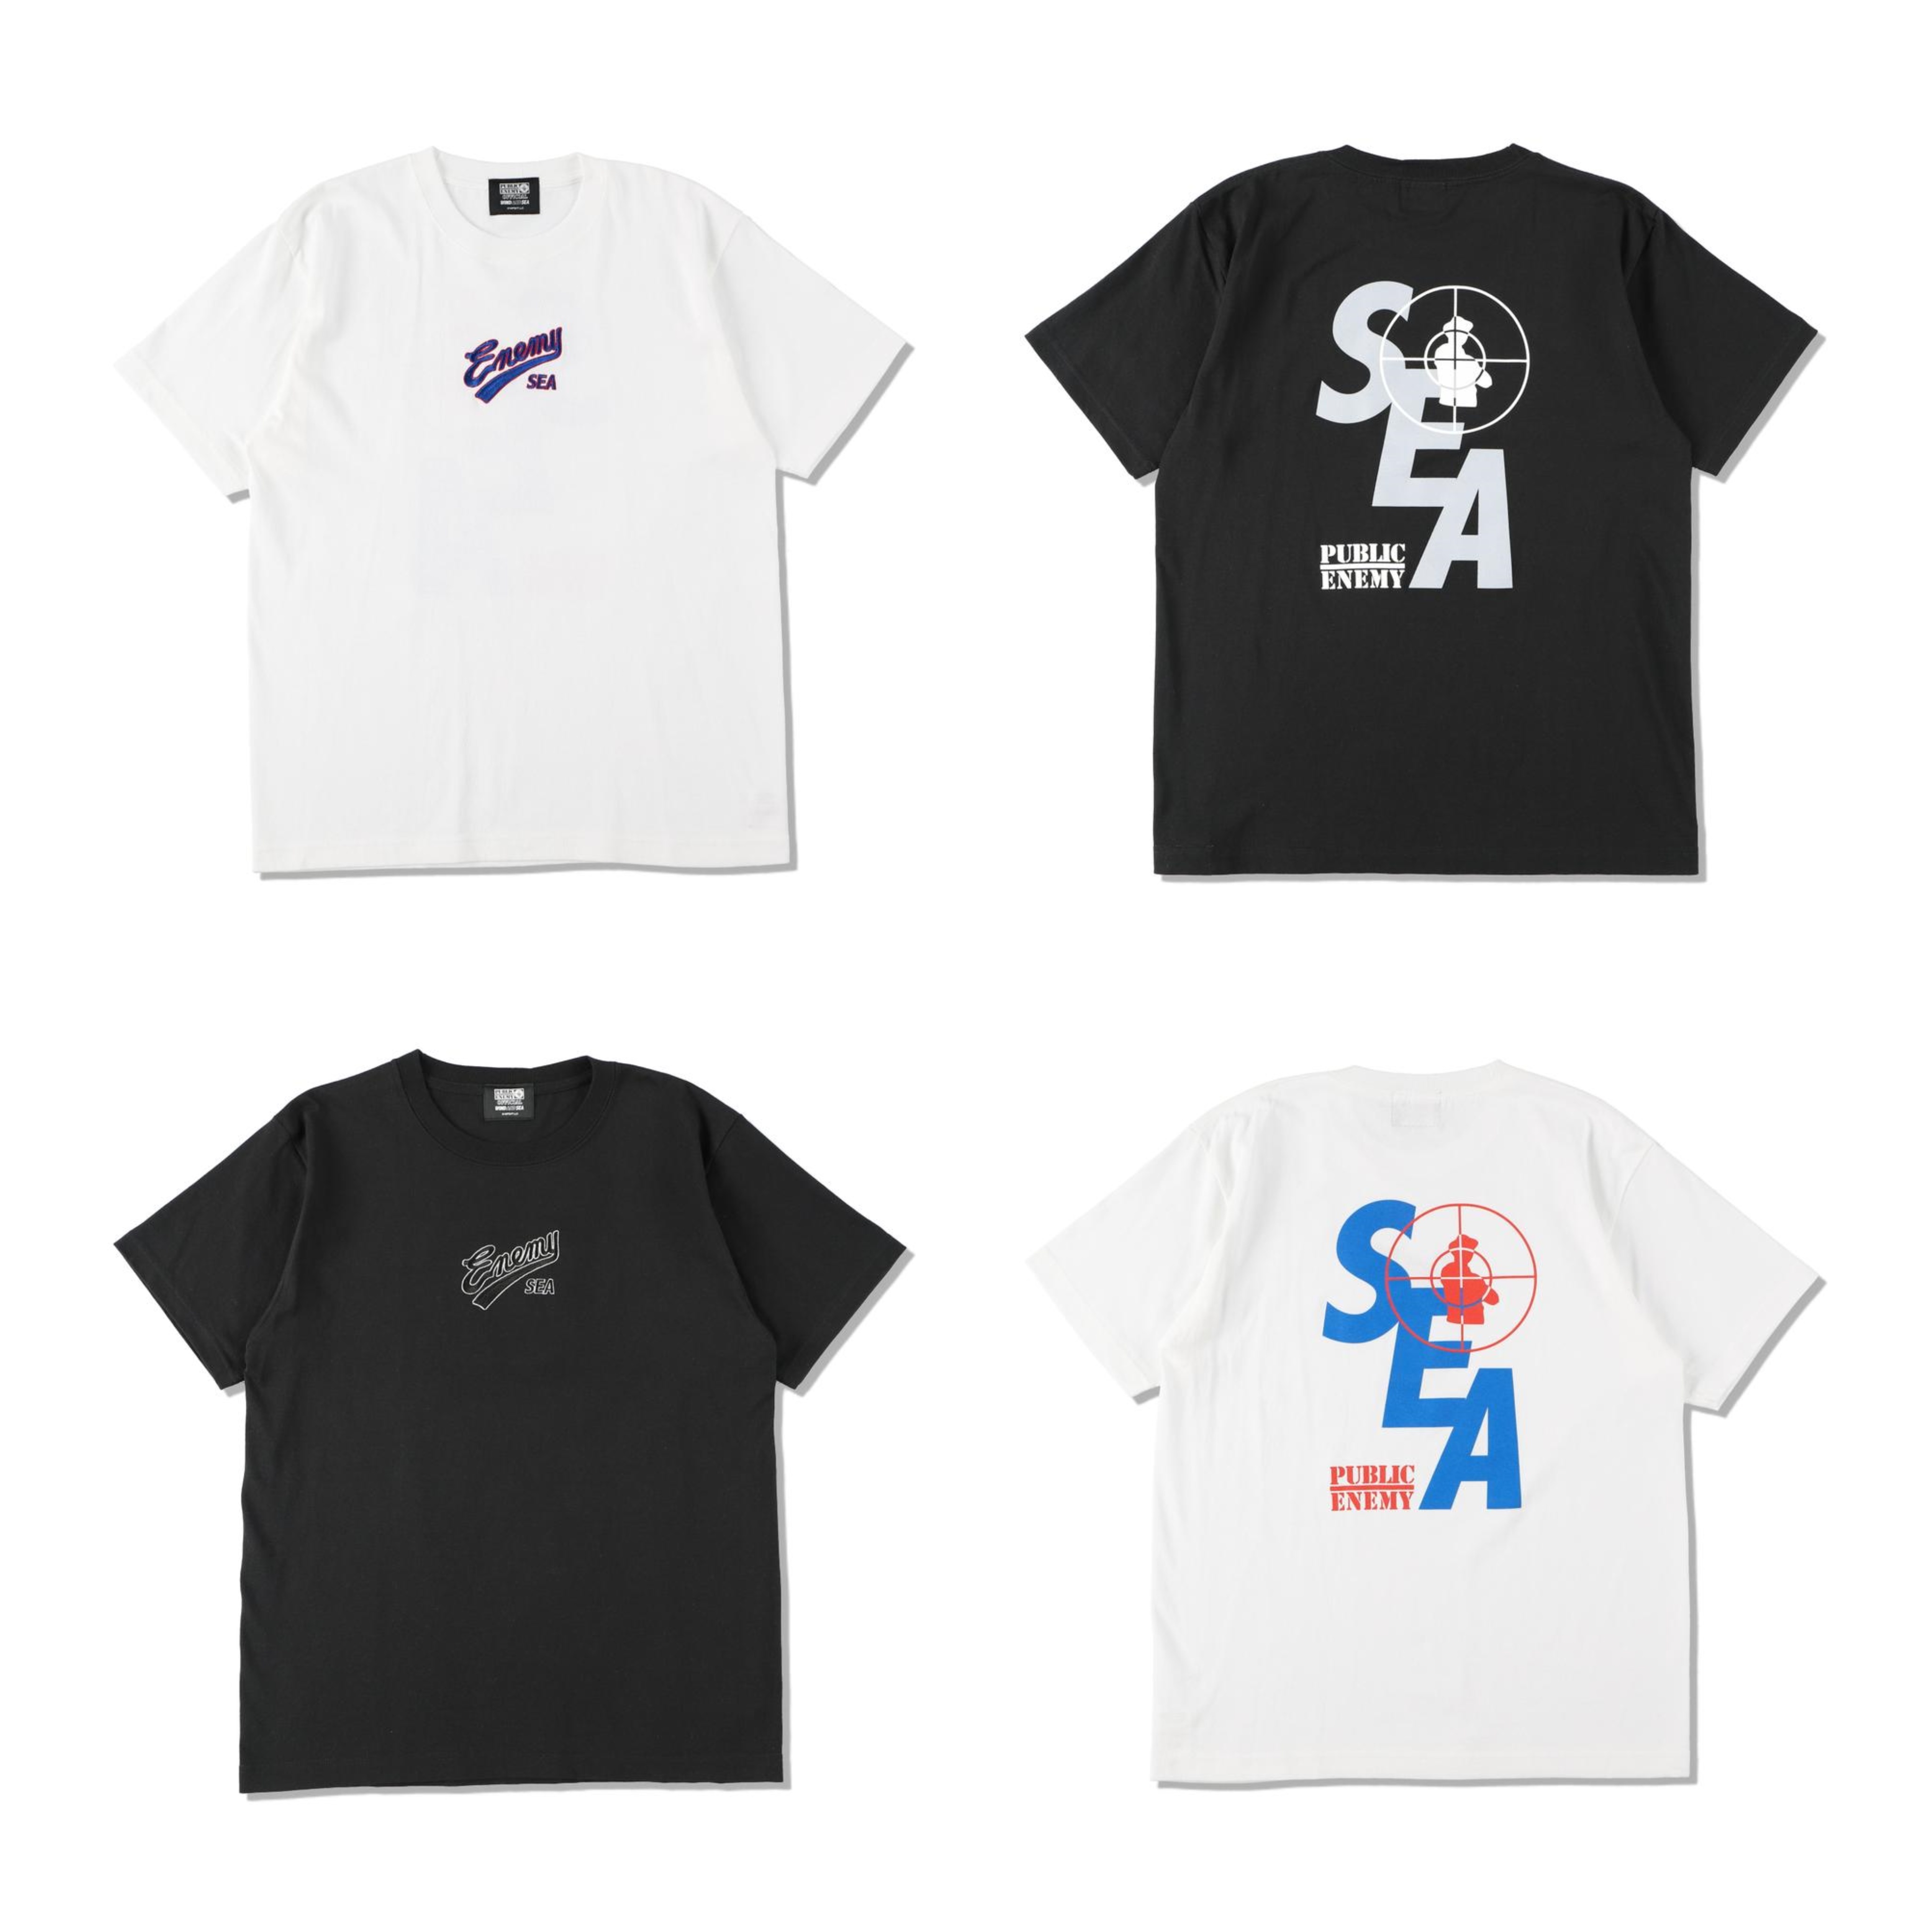 PUBLIC ENEMY X WDS -S_E_A- S/S TEE 白トップス - Tシャツ/カットソー ...